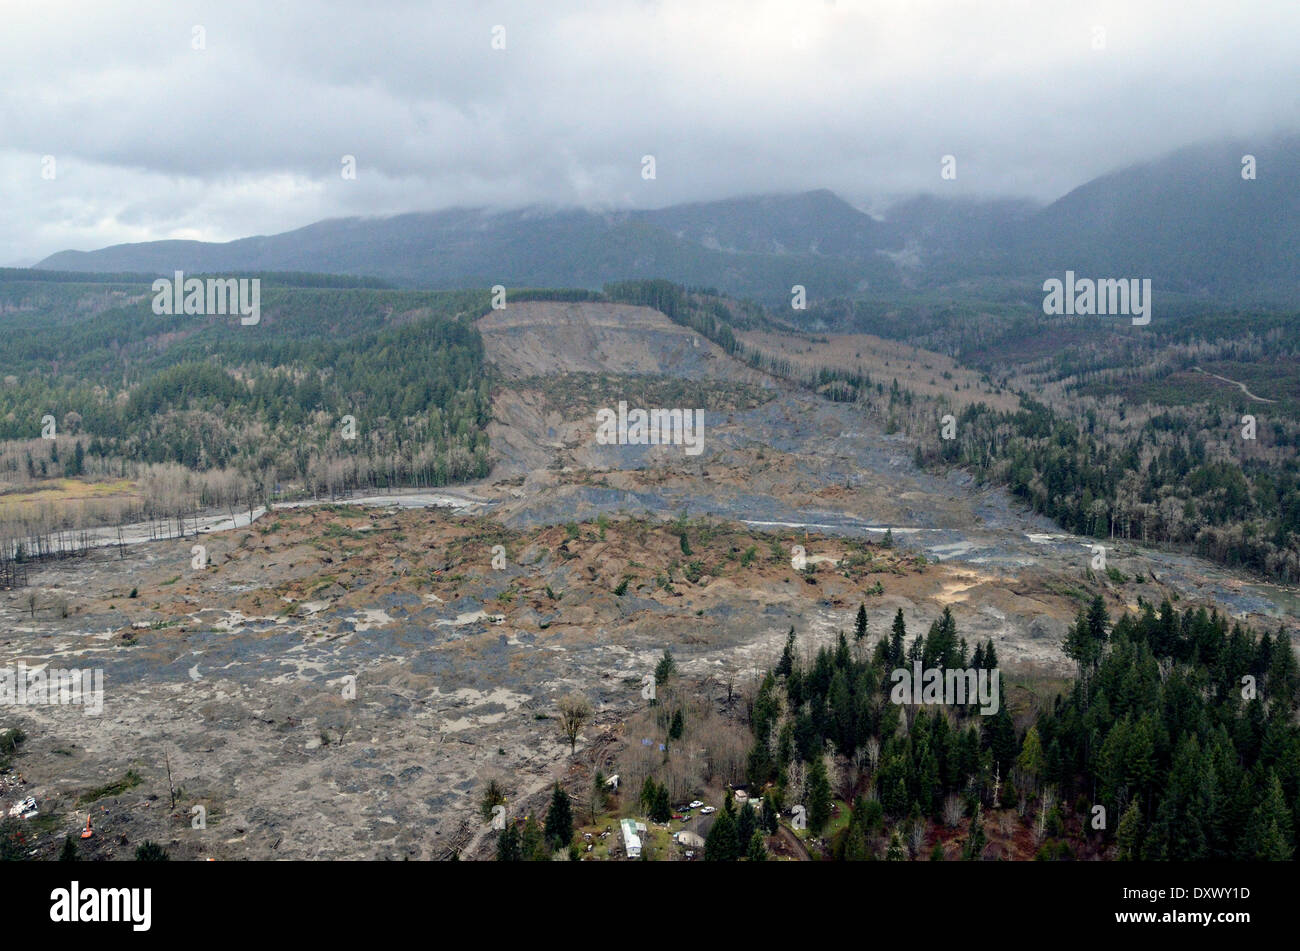 Aerial view of the aftermath of the mudslide more than a week after it occurred along highway 530 killing at least 28 people and destroyed a small riverside village in northwestern Washington state March 31, 2014 in Oso, Washington. Stock Photo